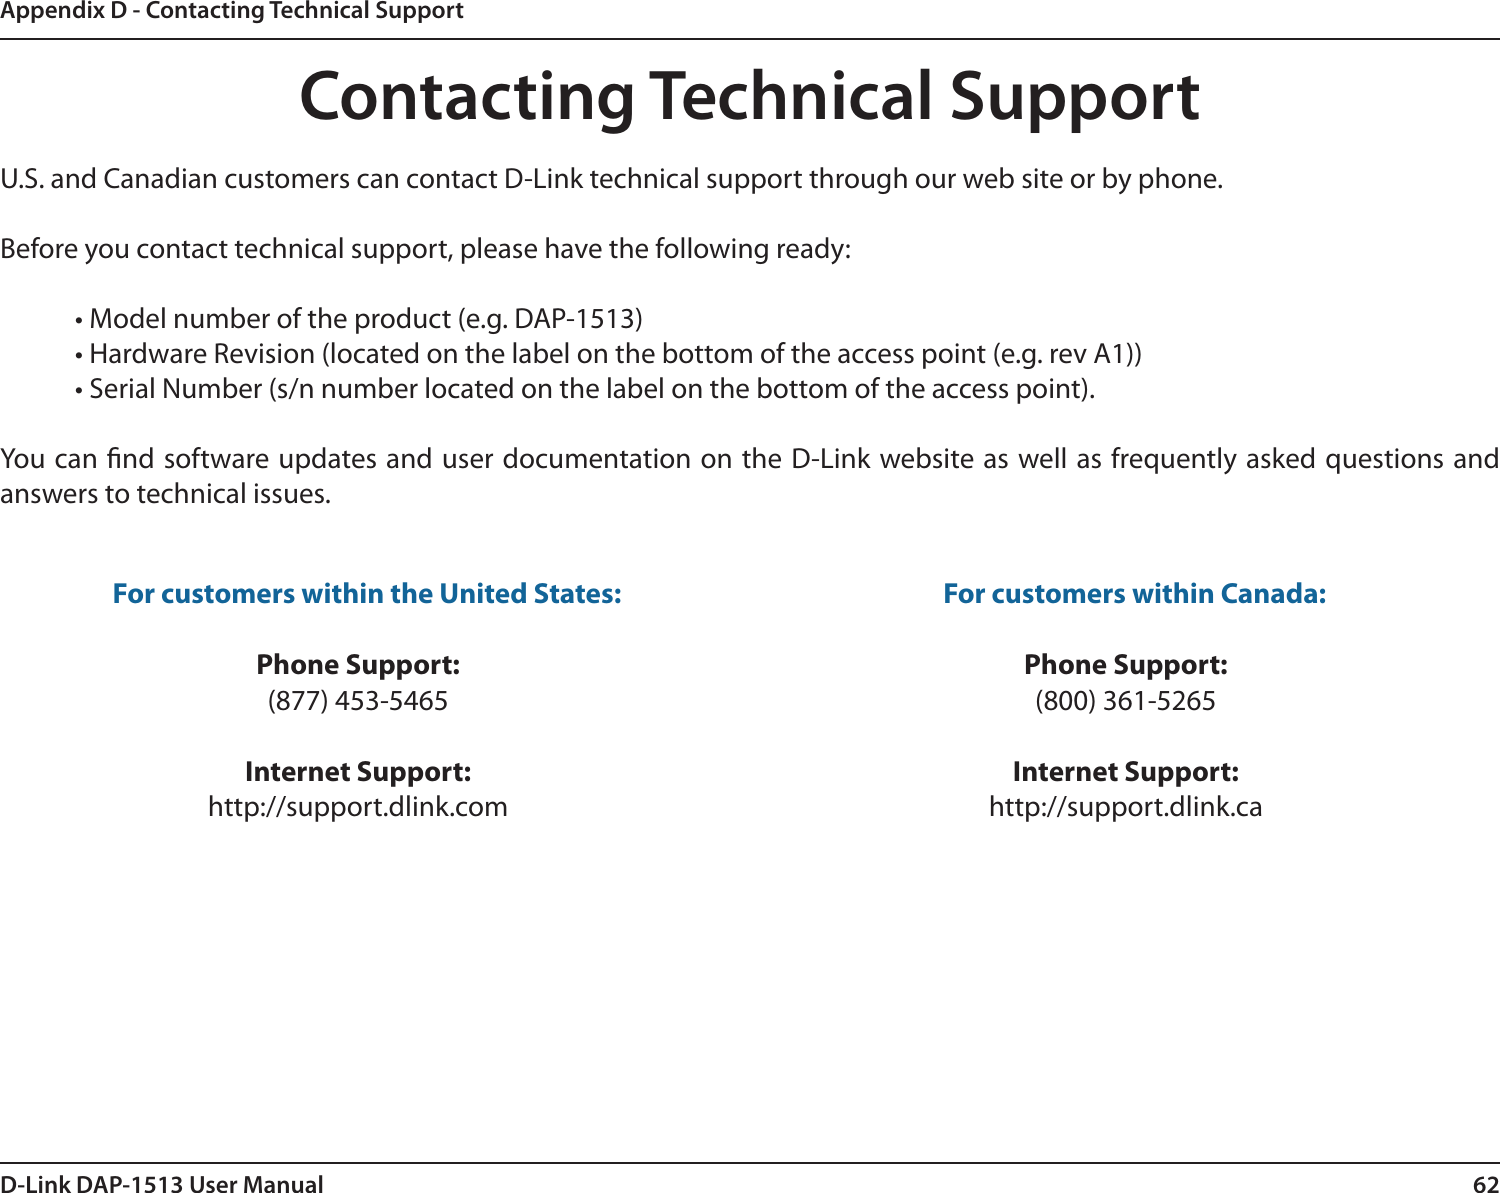 62D-Link DAP-1513 User ManualAppendix D - Contacting Technical SupportContacting Technical SupportU.S. and Canadian customers can contact D-Link technical support through our web site or by phone.Before you contact technical support, please have the following ready:  • Model number of the product (e.g. DAP-1513)  • Hardware Revision (located on the label on the bottom of the access point (e.g. rev A1))  • Serial Number (s/n number located on the label on the bottom of the access point). You can nd software updates and user documentation on the D-Link website as well as frequently asked questions and answers to technical issues.For customers within the United States: Phone Support:(877) 453-5465Internet Support:http://support.dlink.com For customers within Canada: Phone Support:(800) 361-5265 Internet Support:http://support.dlink.ca